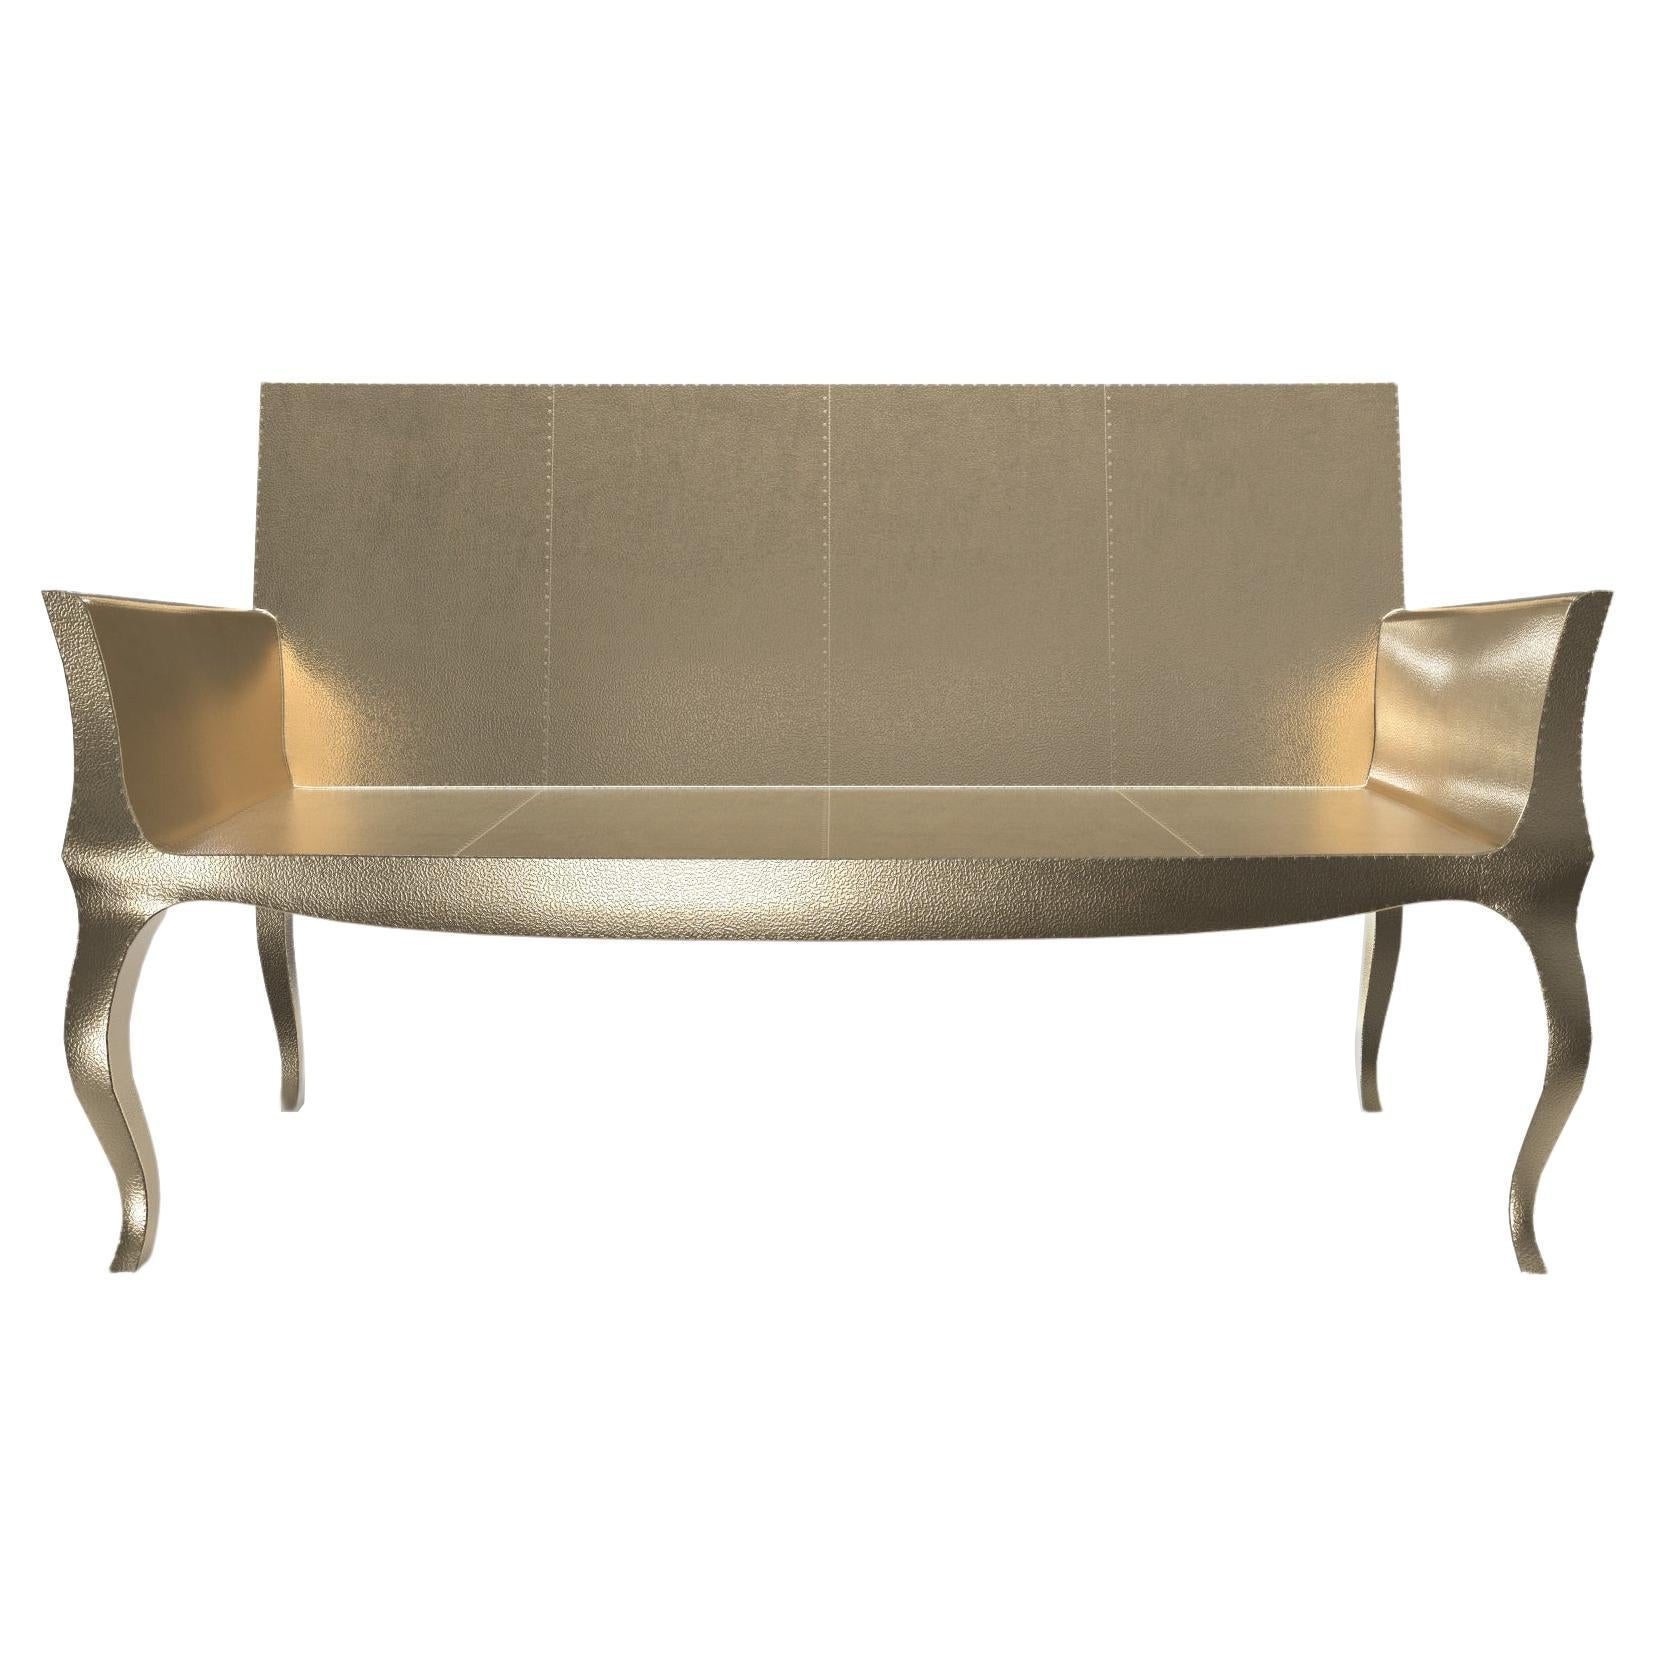 Louise Settee Art Deco Daybeds in Fine Hammered Brass by Paul Mathieu